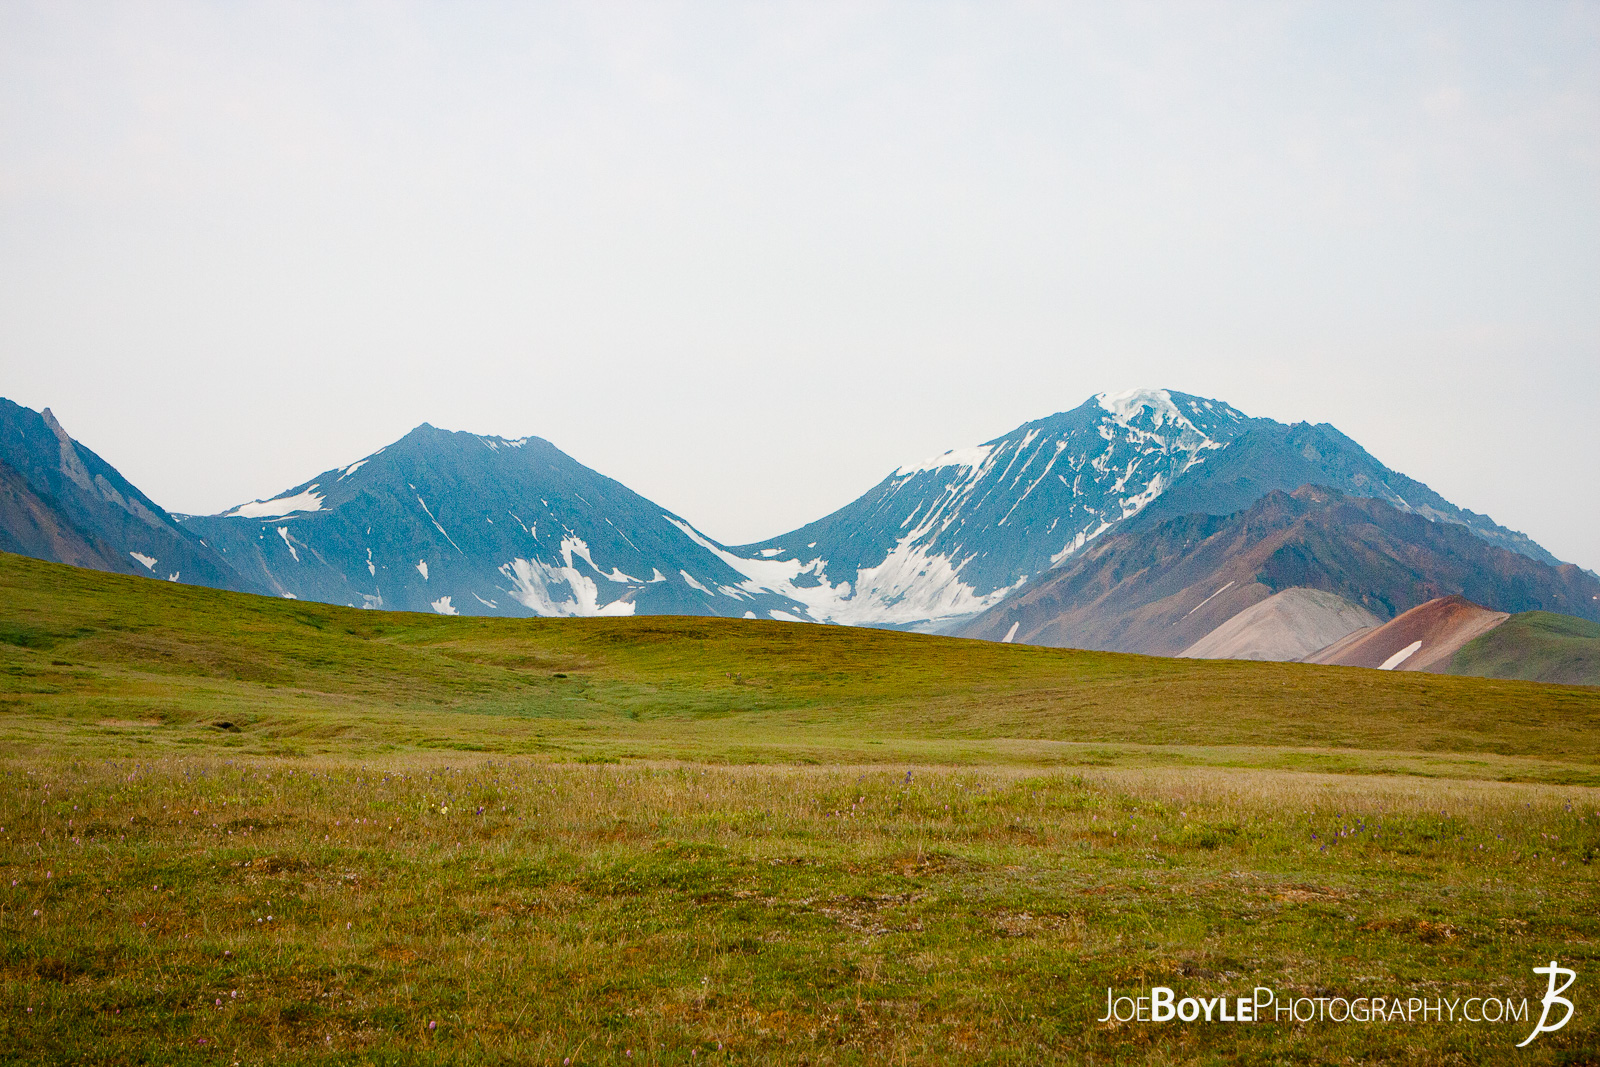  This was the first grid or unit that my buddy and I hiked in upon our arrival in Denali National Park. The views were beautiful but the terrain was TOUGH to walk through! 